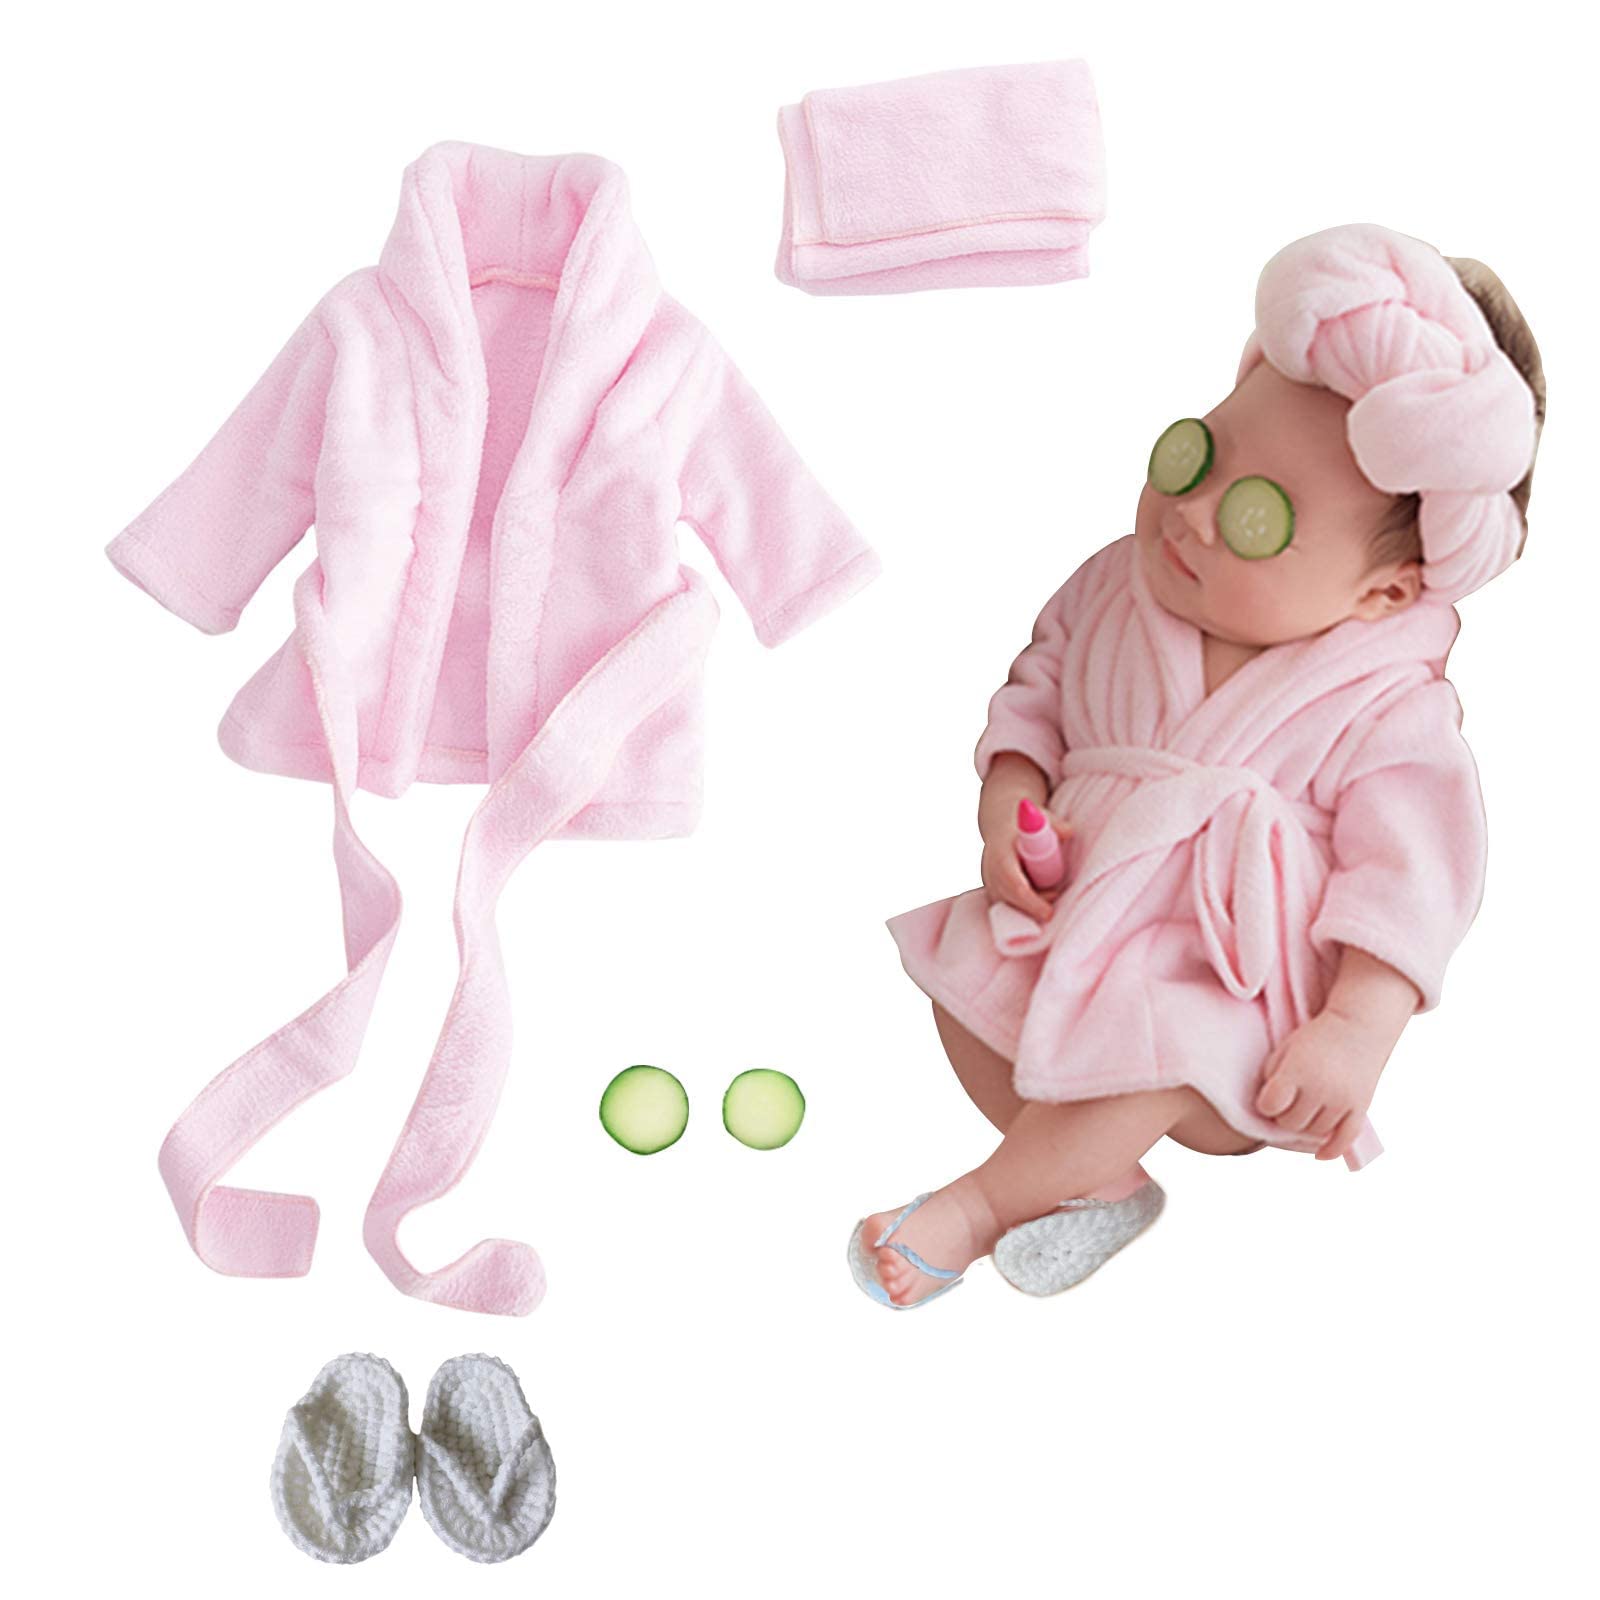 SPOKKI Newborn Photography Props Baby Girl 5 PCS Bathrobes Bath Towel  Outfit with Slippers Cucumber Photo Props for Infant Boys Girls(0-6 Months)  (Pink)